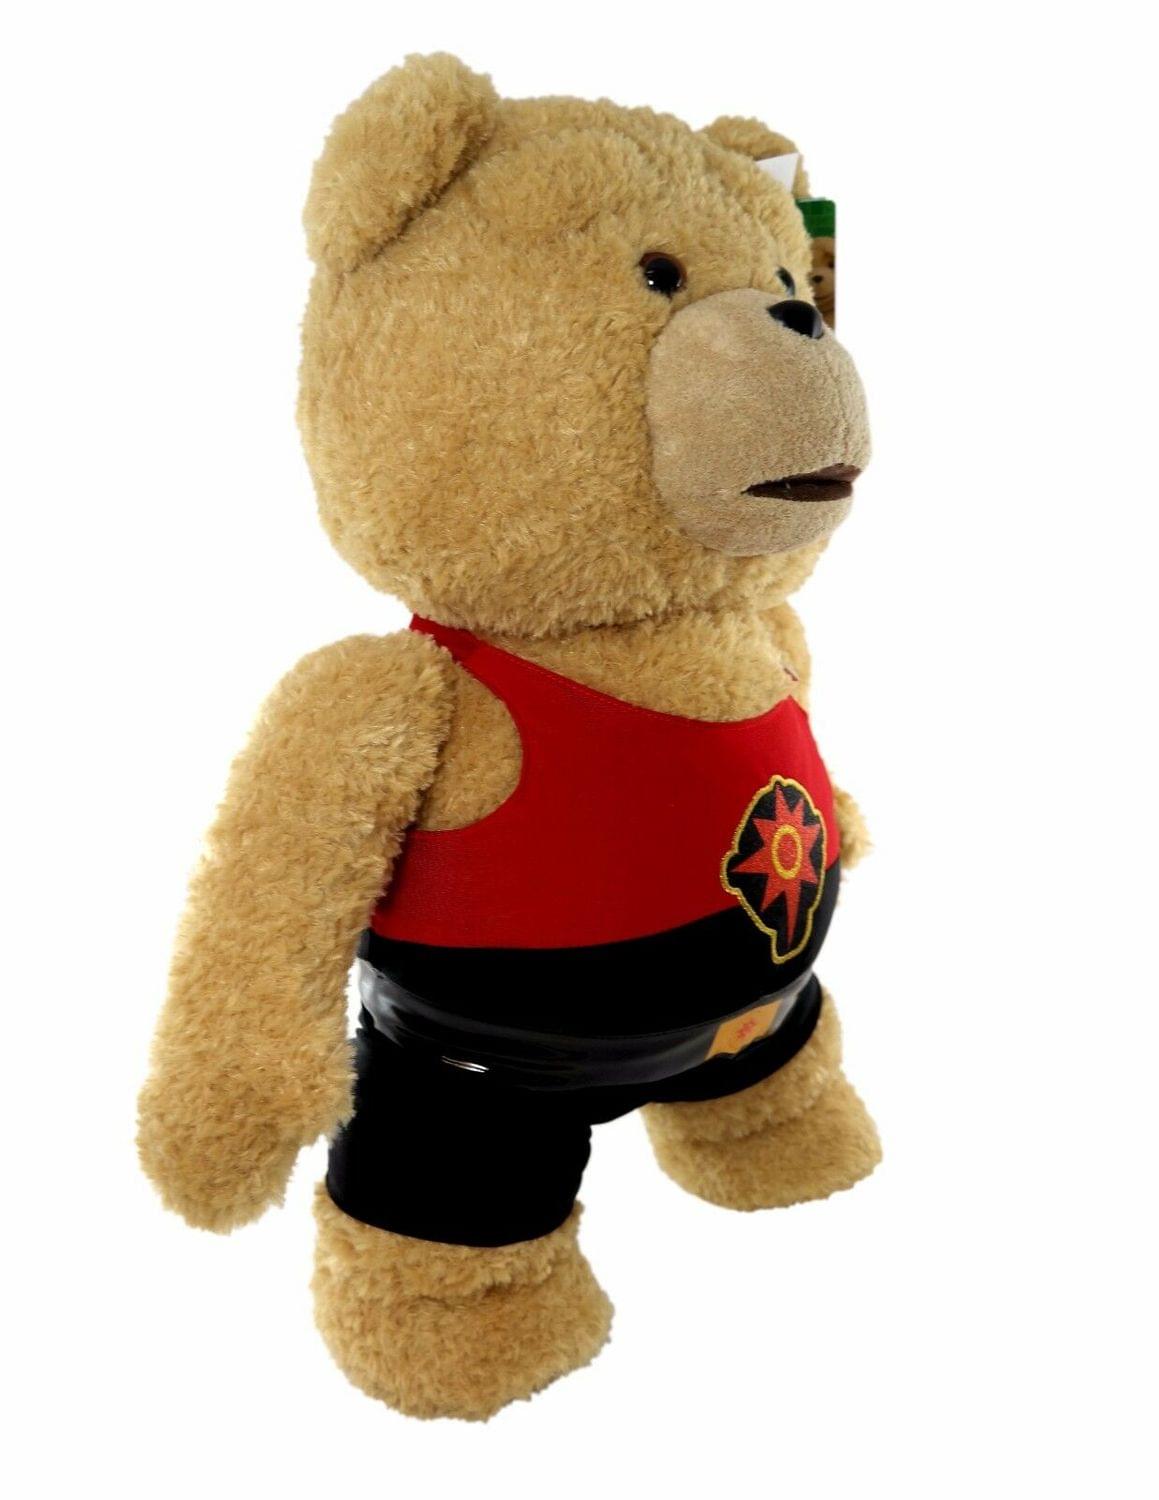 Ted 2 Talking Ted In Flash Outfit 24 Inch Plush Teddy Bear - Explicit